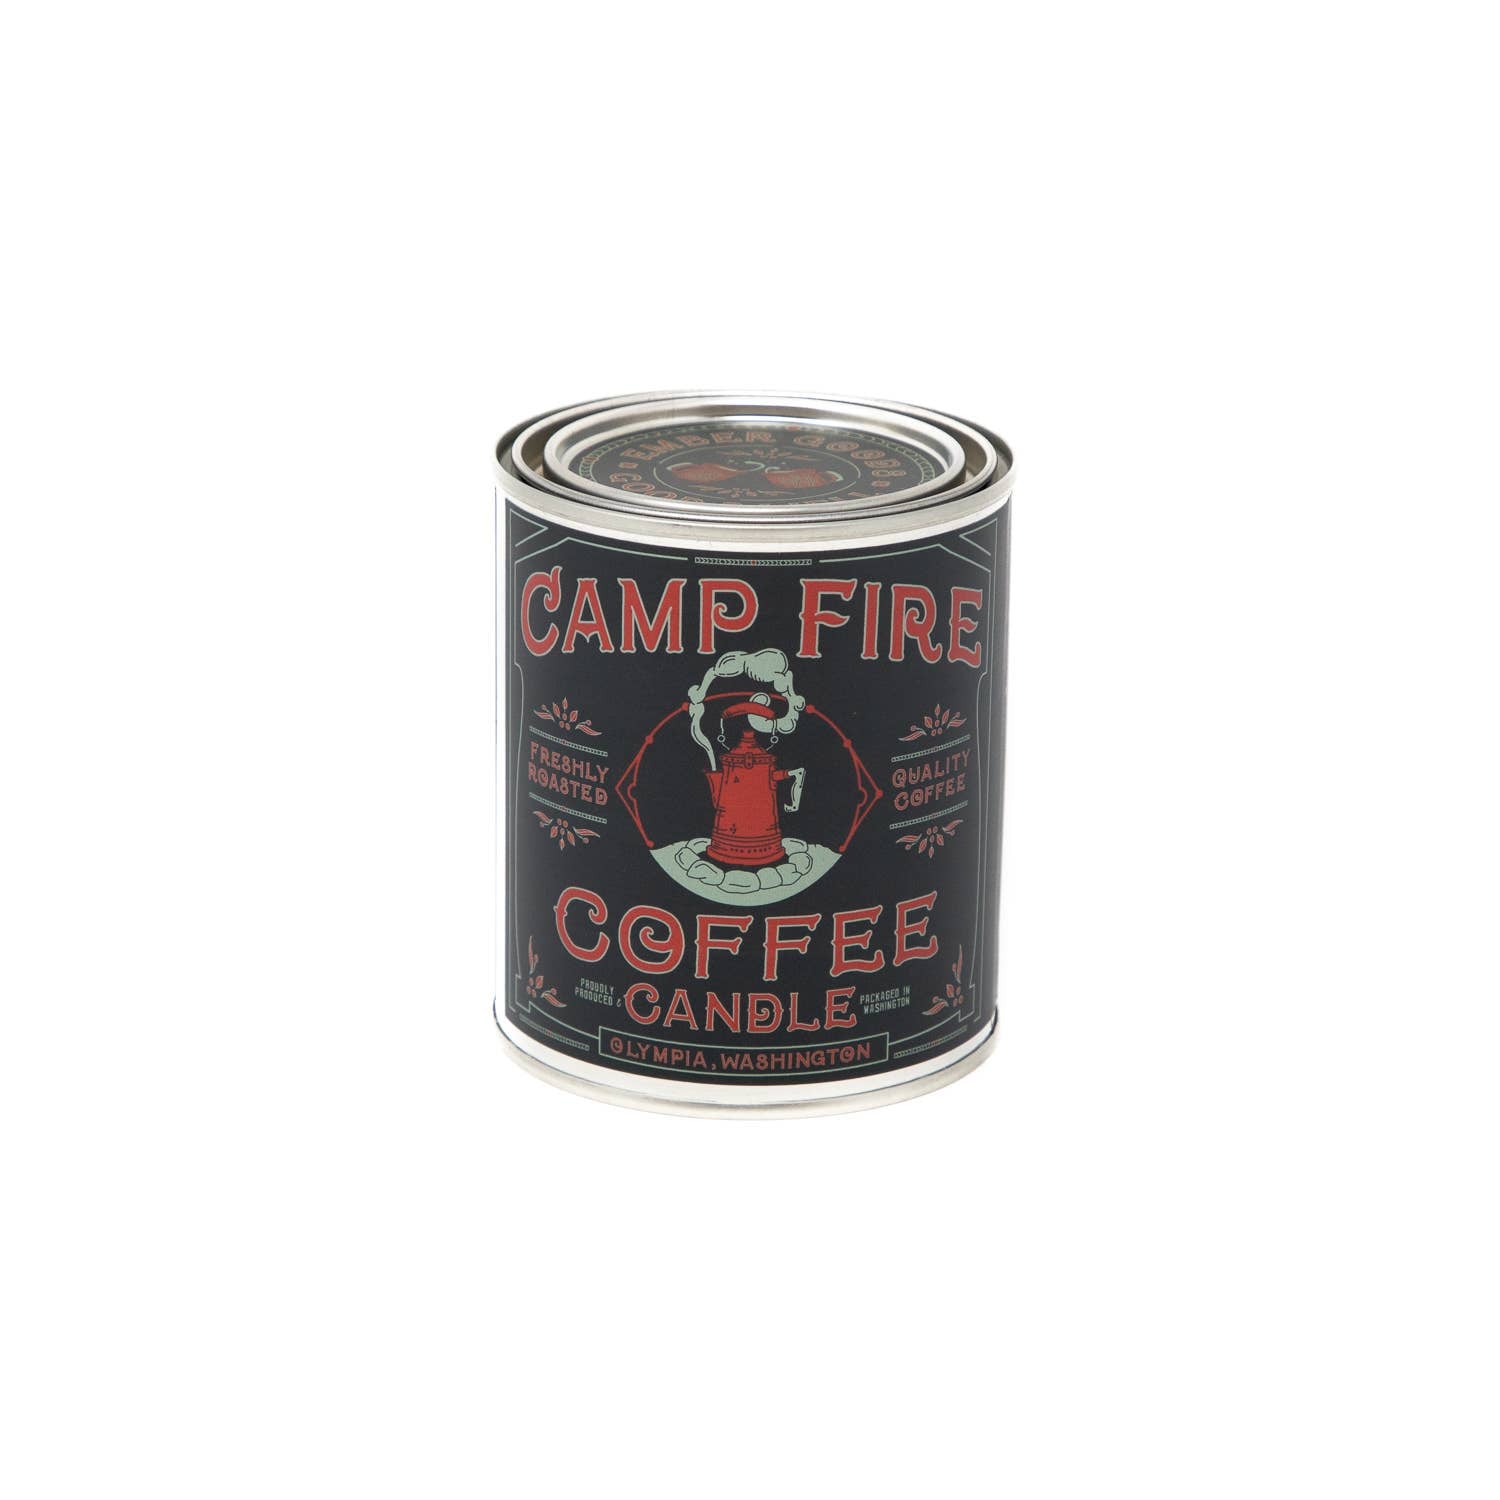 Campfire Coffee Candle: 1/2 Pint